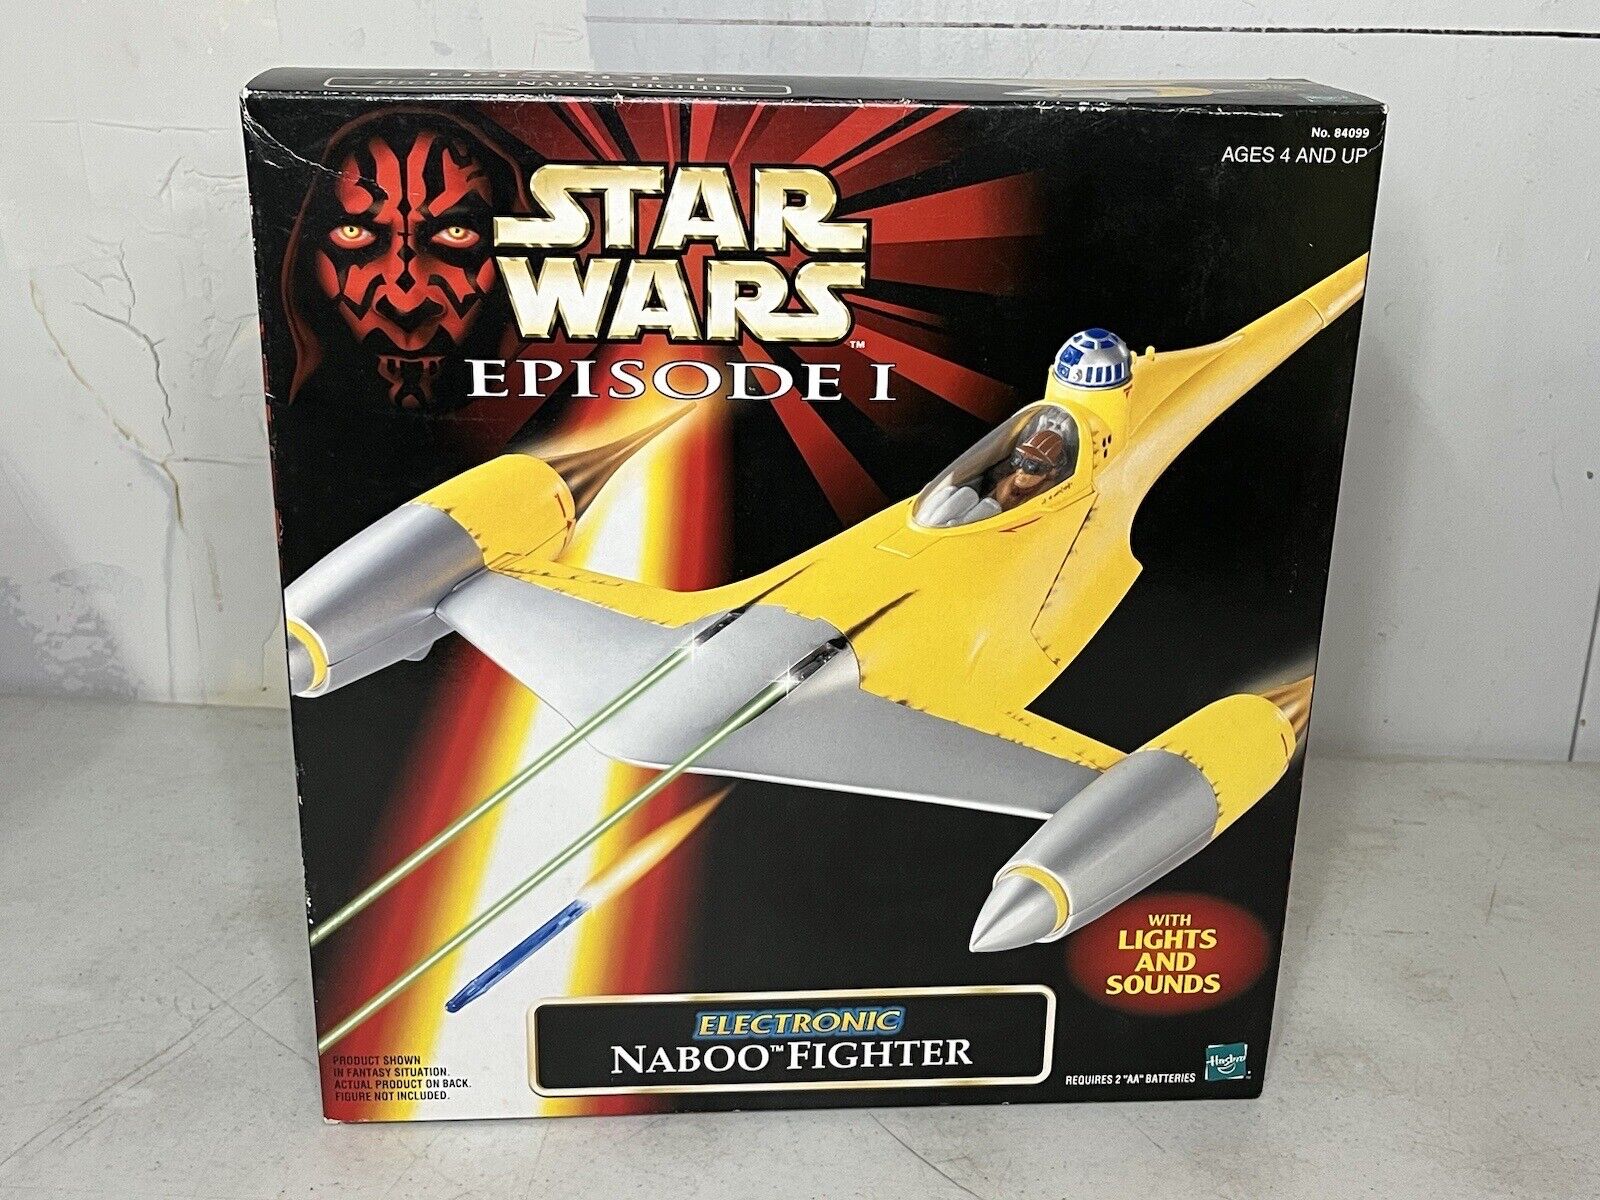 1998 Star Wars Episode 1 Electronic Naboo Fighter Hasbro NOS Factory Sealed